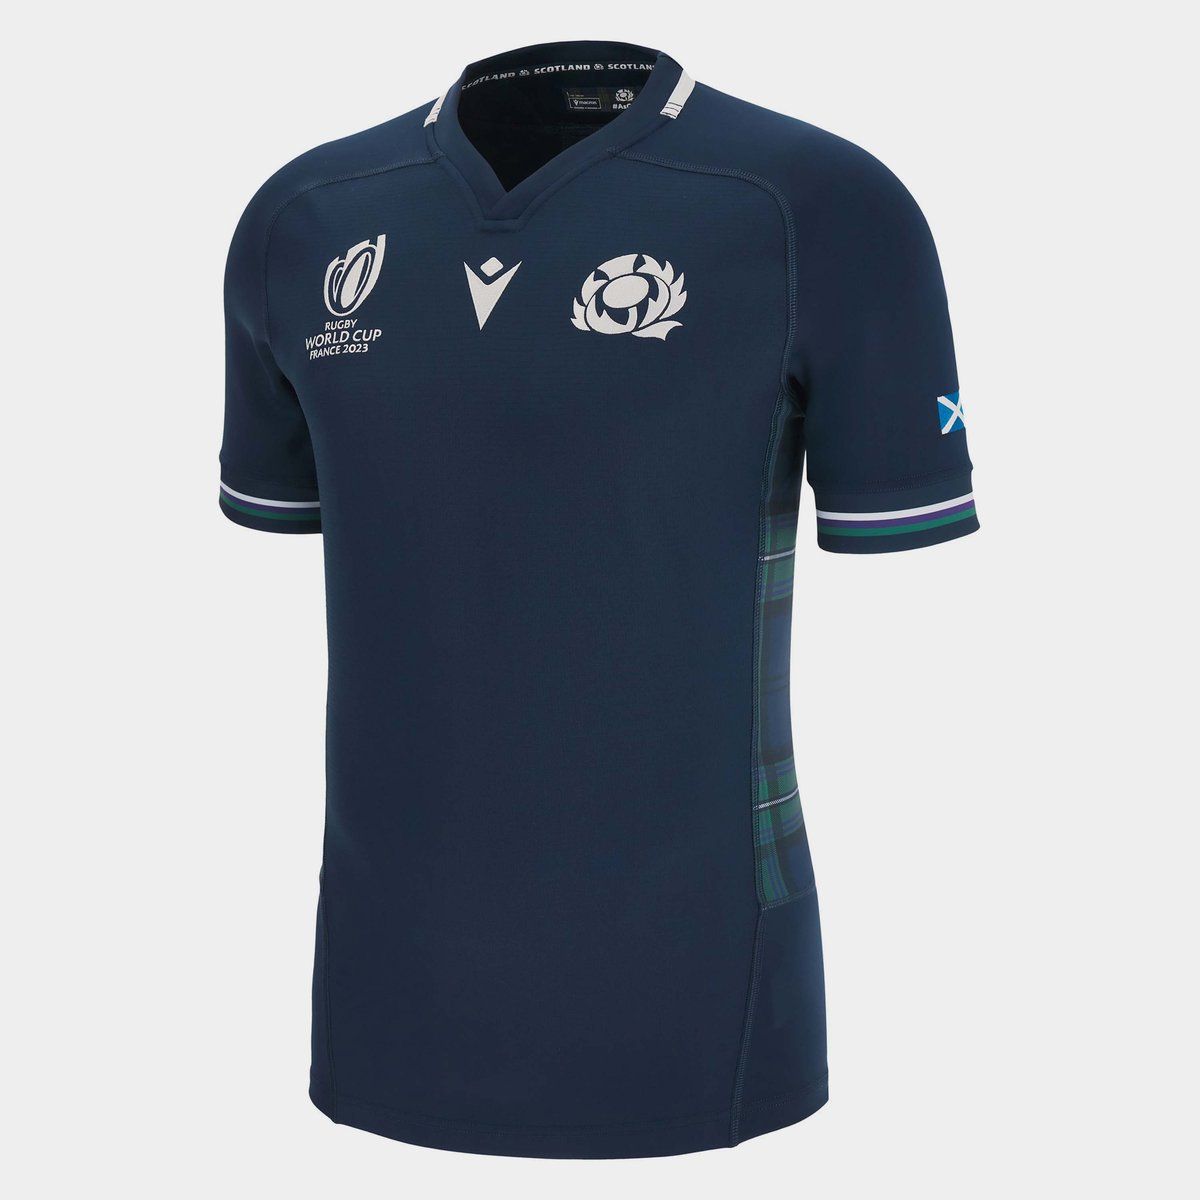 Macron Scotland Rugby RWC 2023 Limited Edition Authentic Home Shirt Mens Blue, £175.00